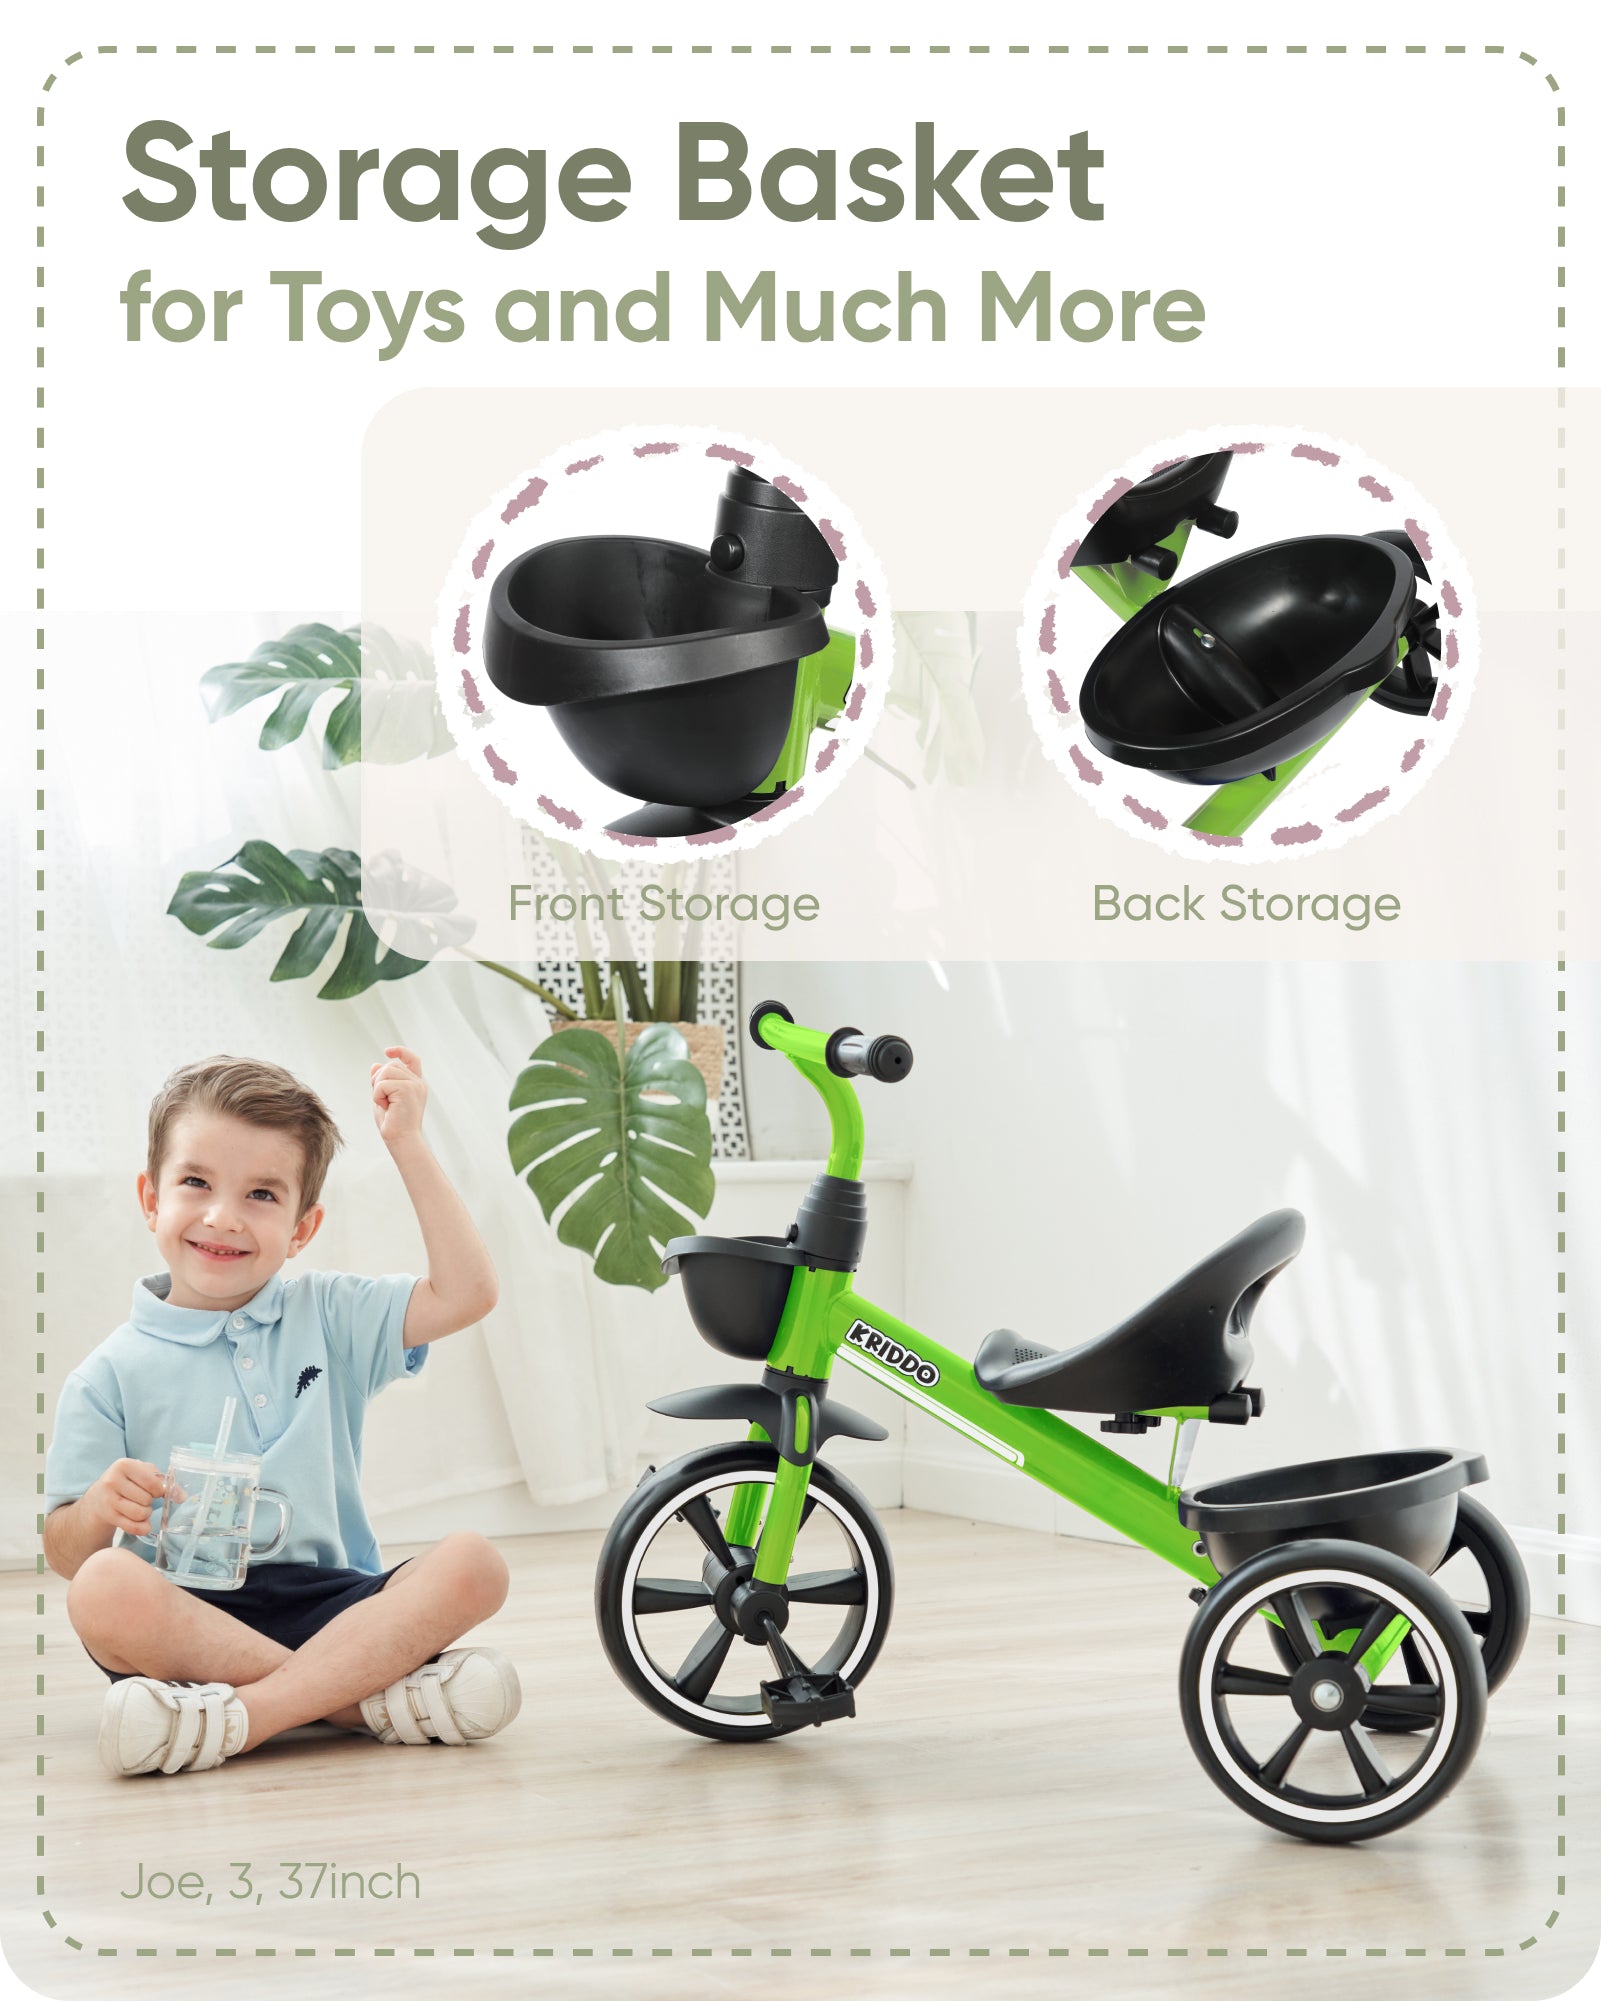 [LIMITED TIME SUPRISE] KRIDDO Kids Tricycles for 2- 5 Years, Storage Bin, Easy Assembly, RANDOM COLOR